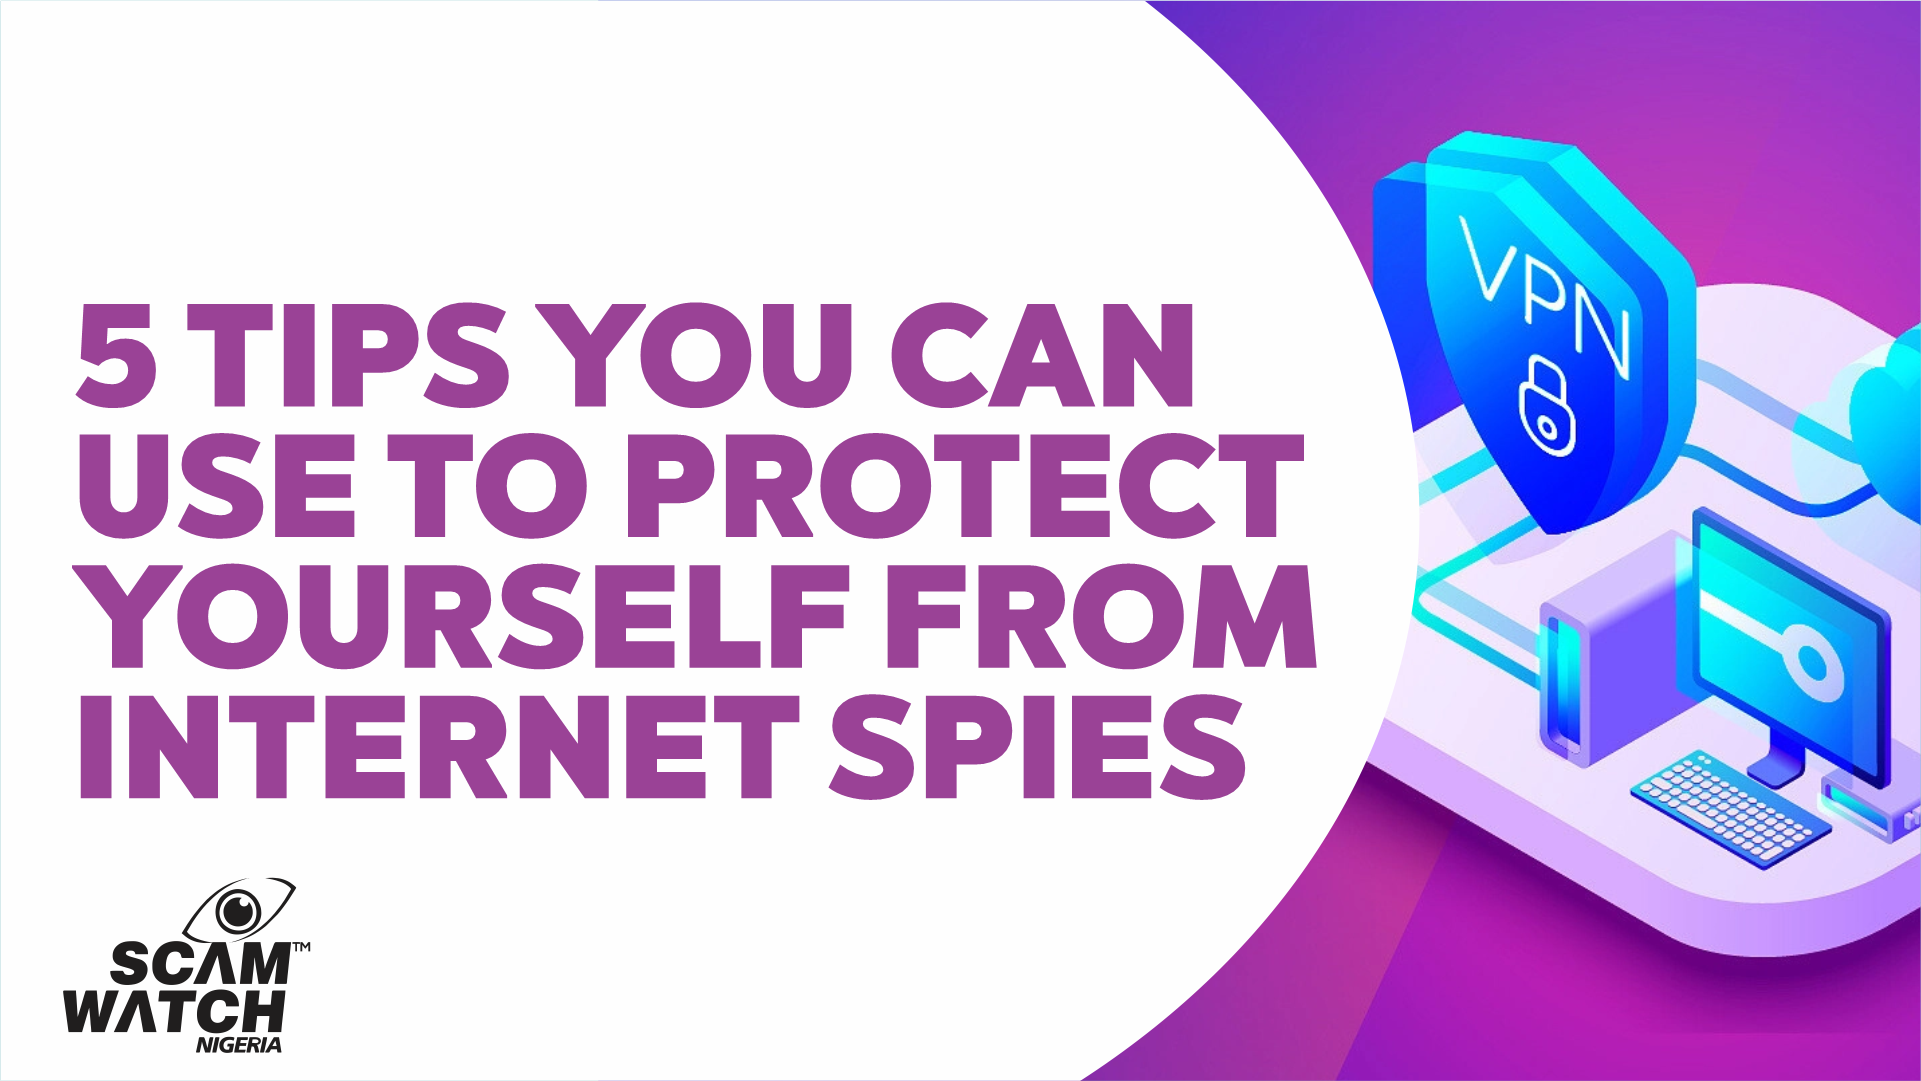 Five tips you can use to protect yourself from internet spies